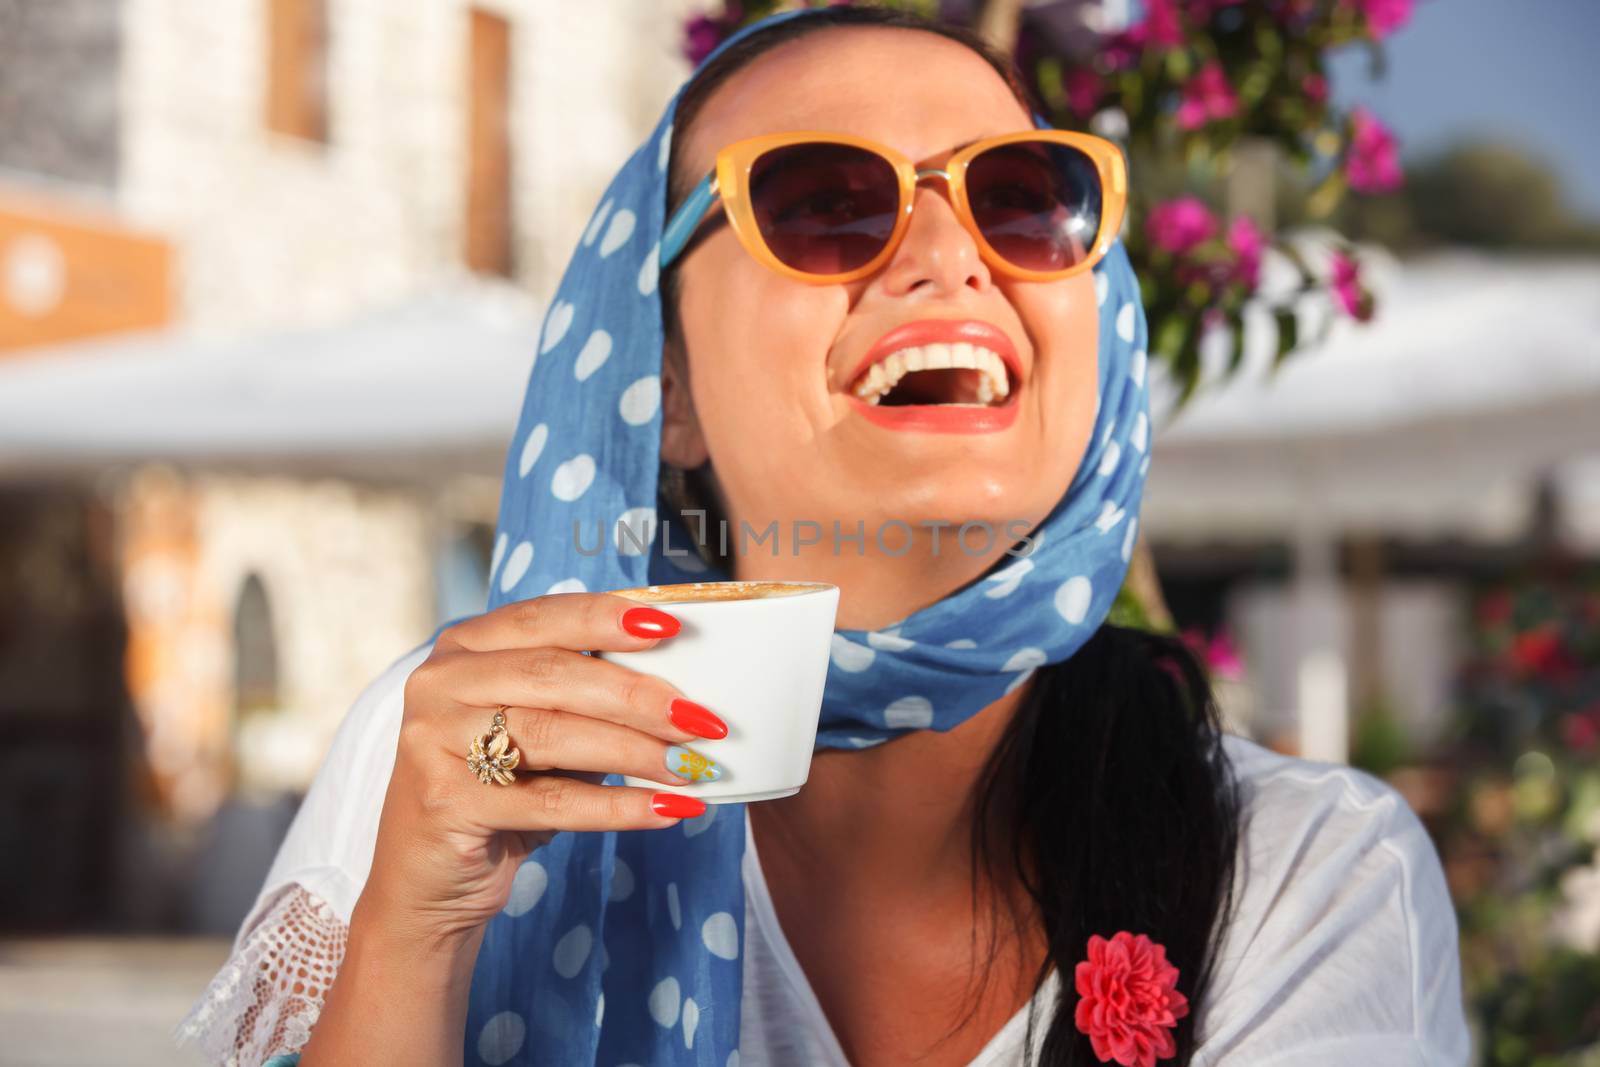 Happy woman drinking coffee In a cafe outdoors, in the sunset. Vintage style, focus on cup of coffee. Shallow depth of field.